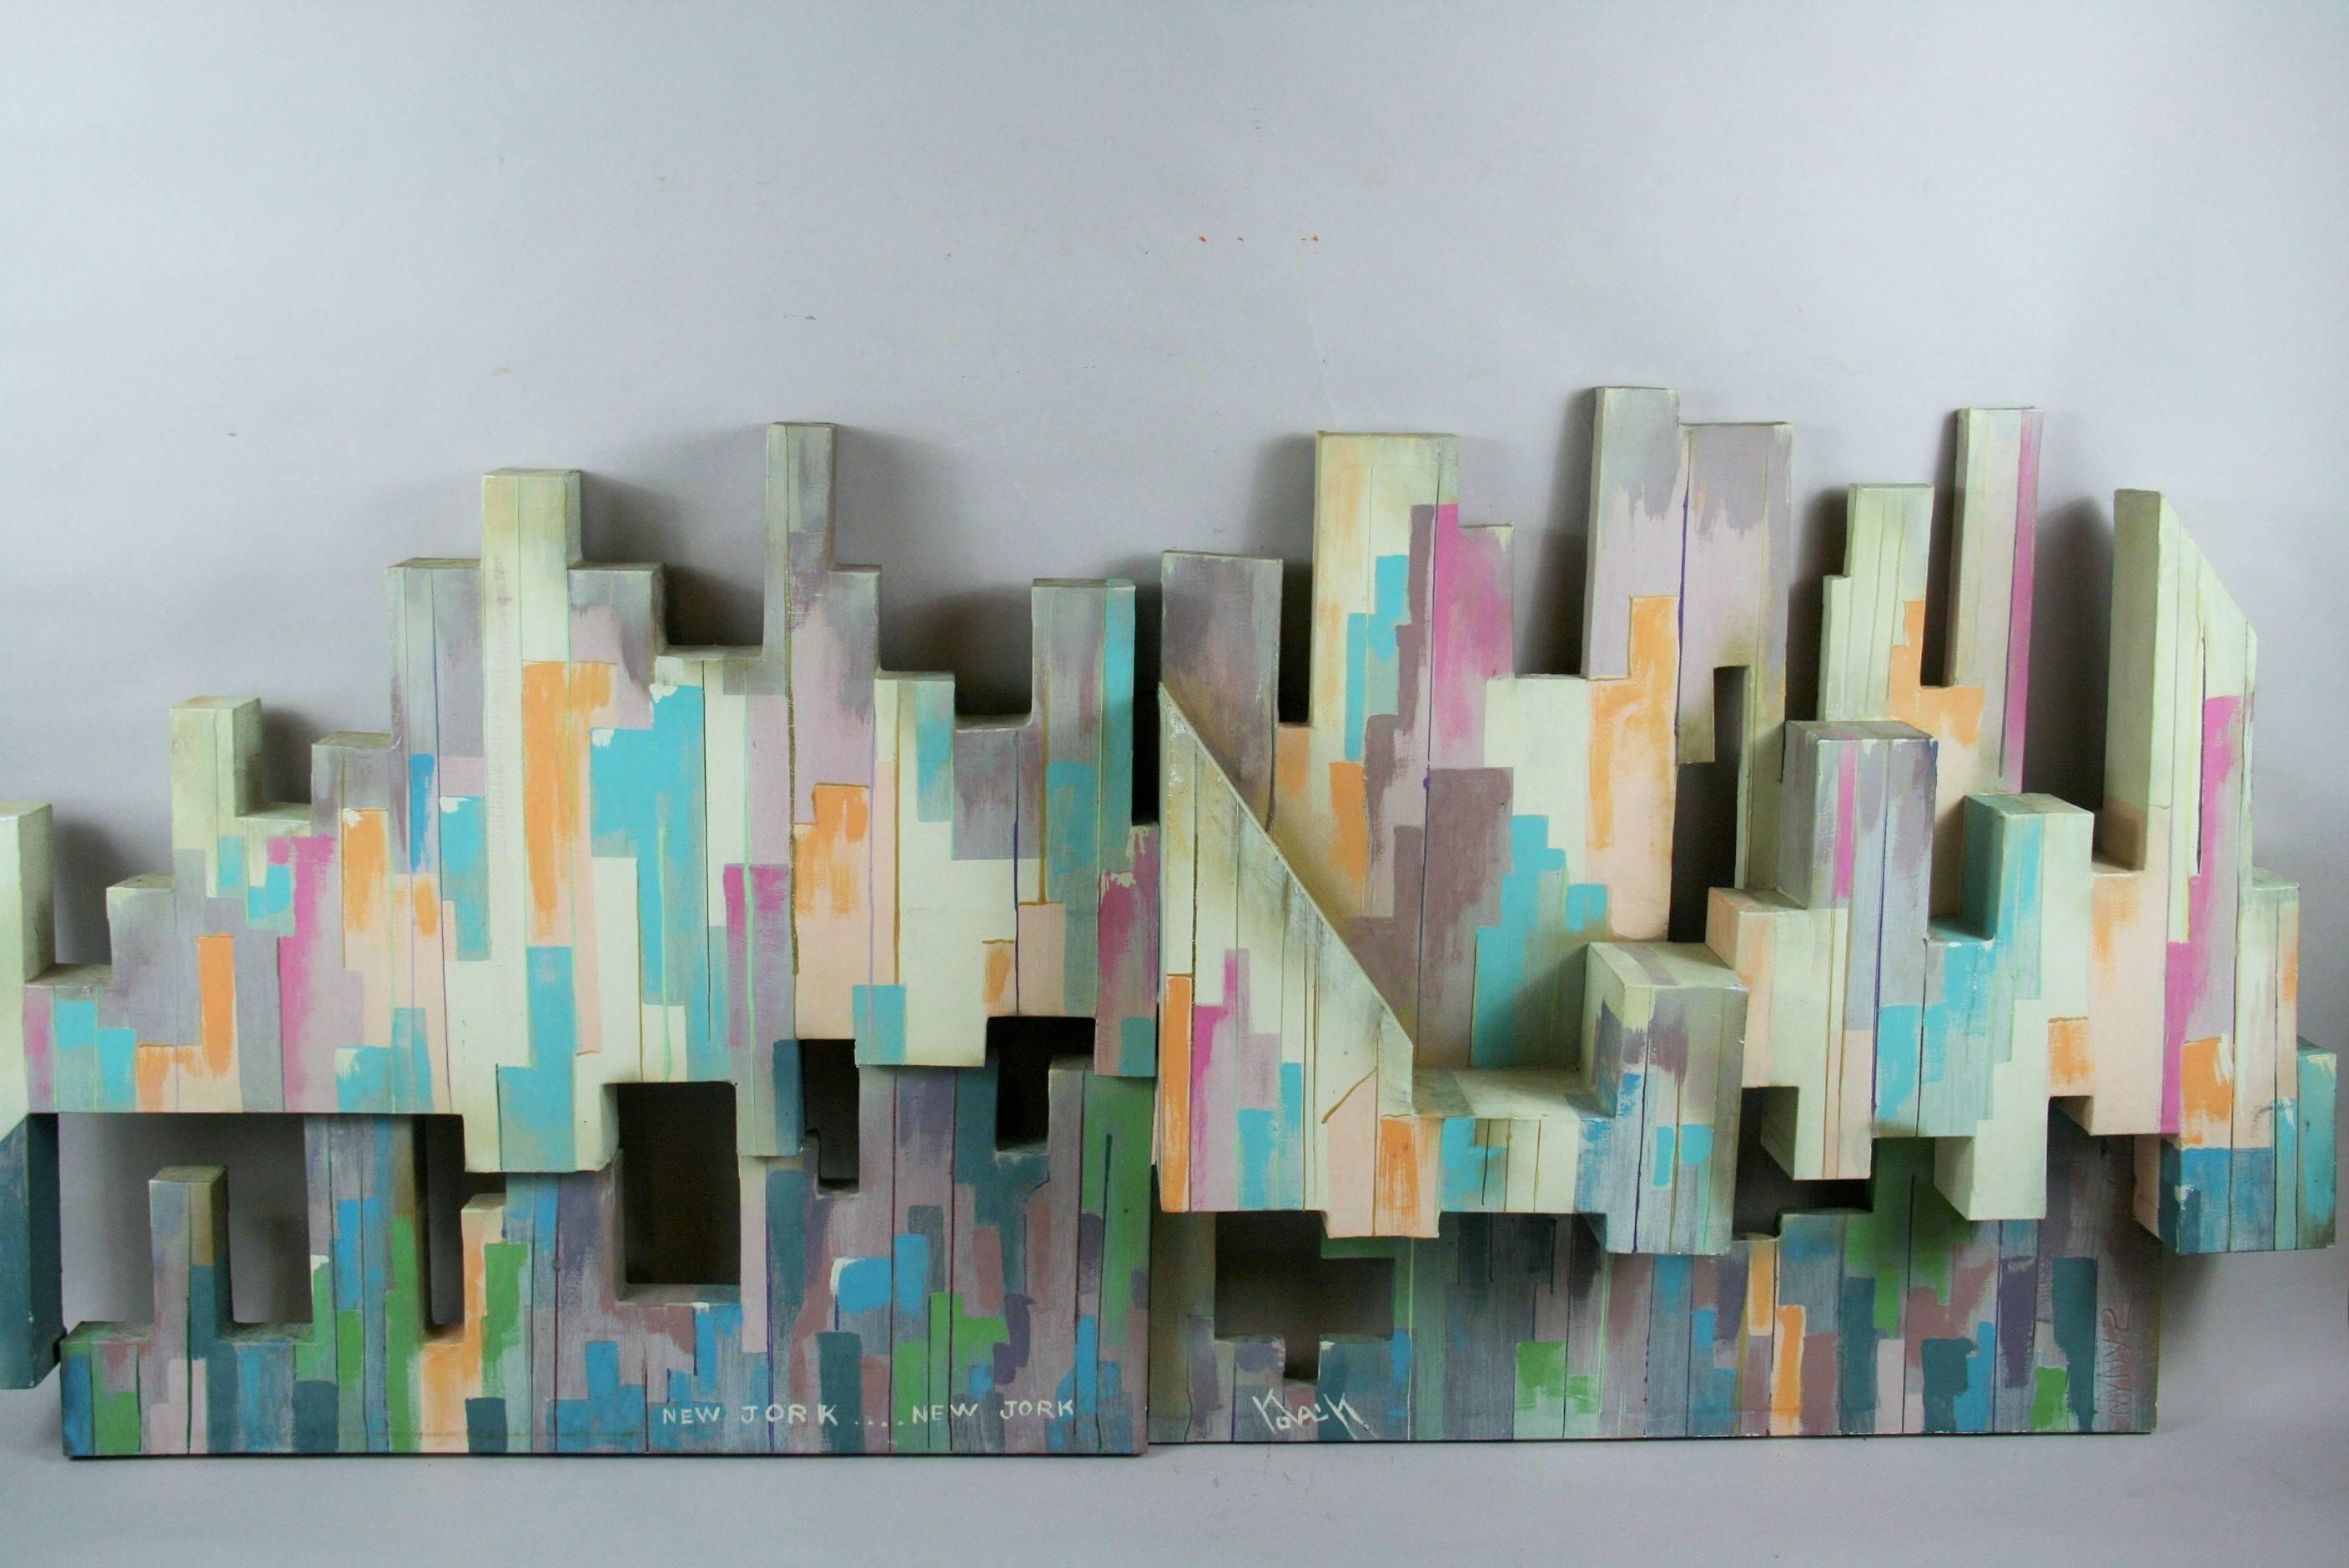  NYC Sculptural Painting by Yolay - Mixed Media Art by Unknown